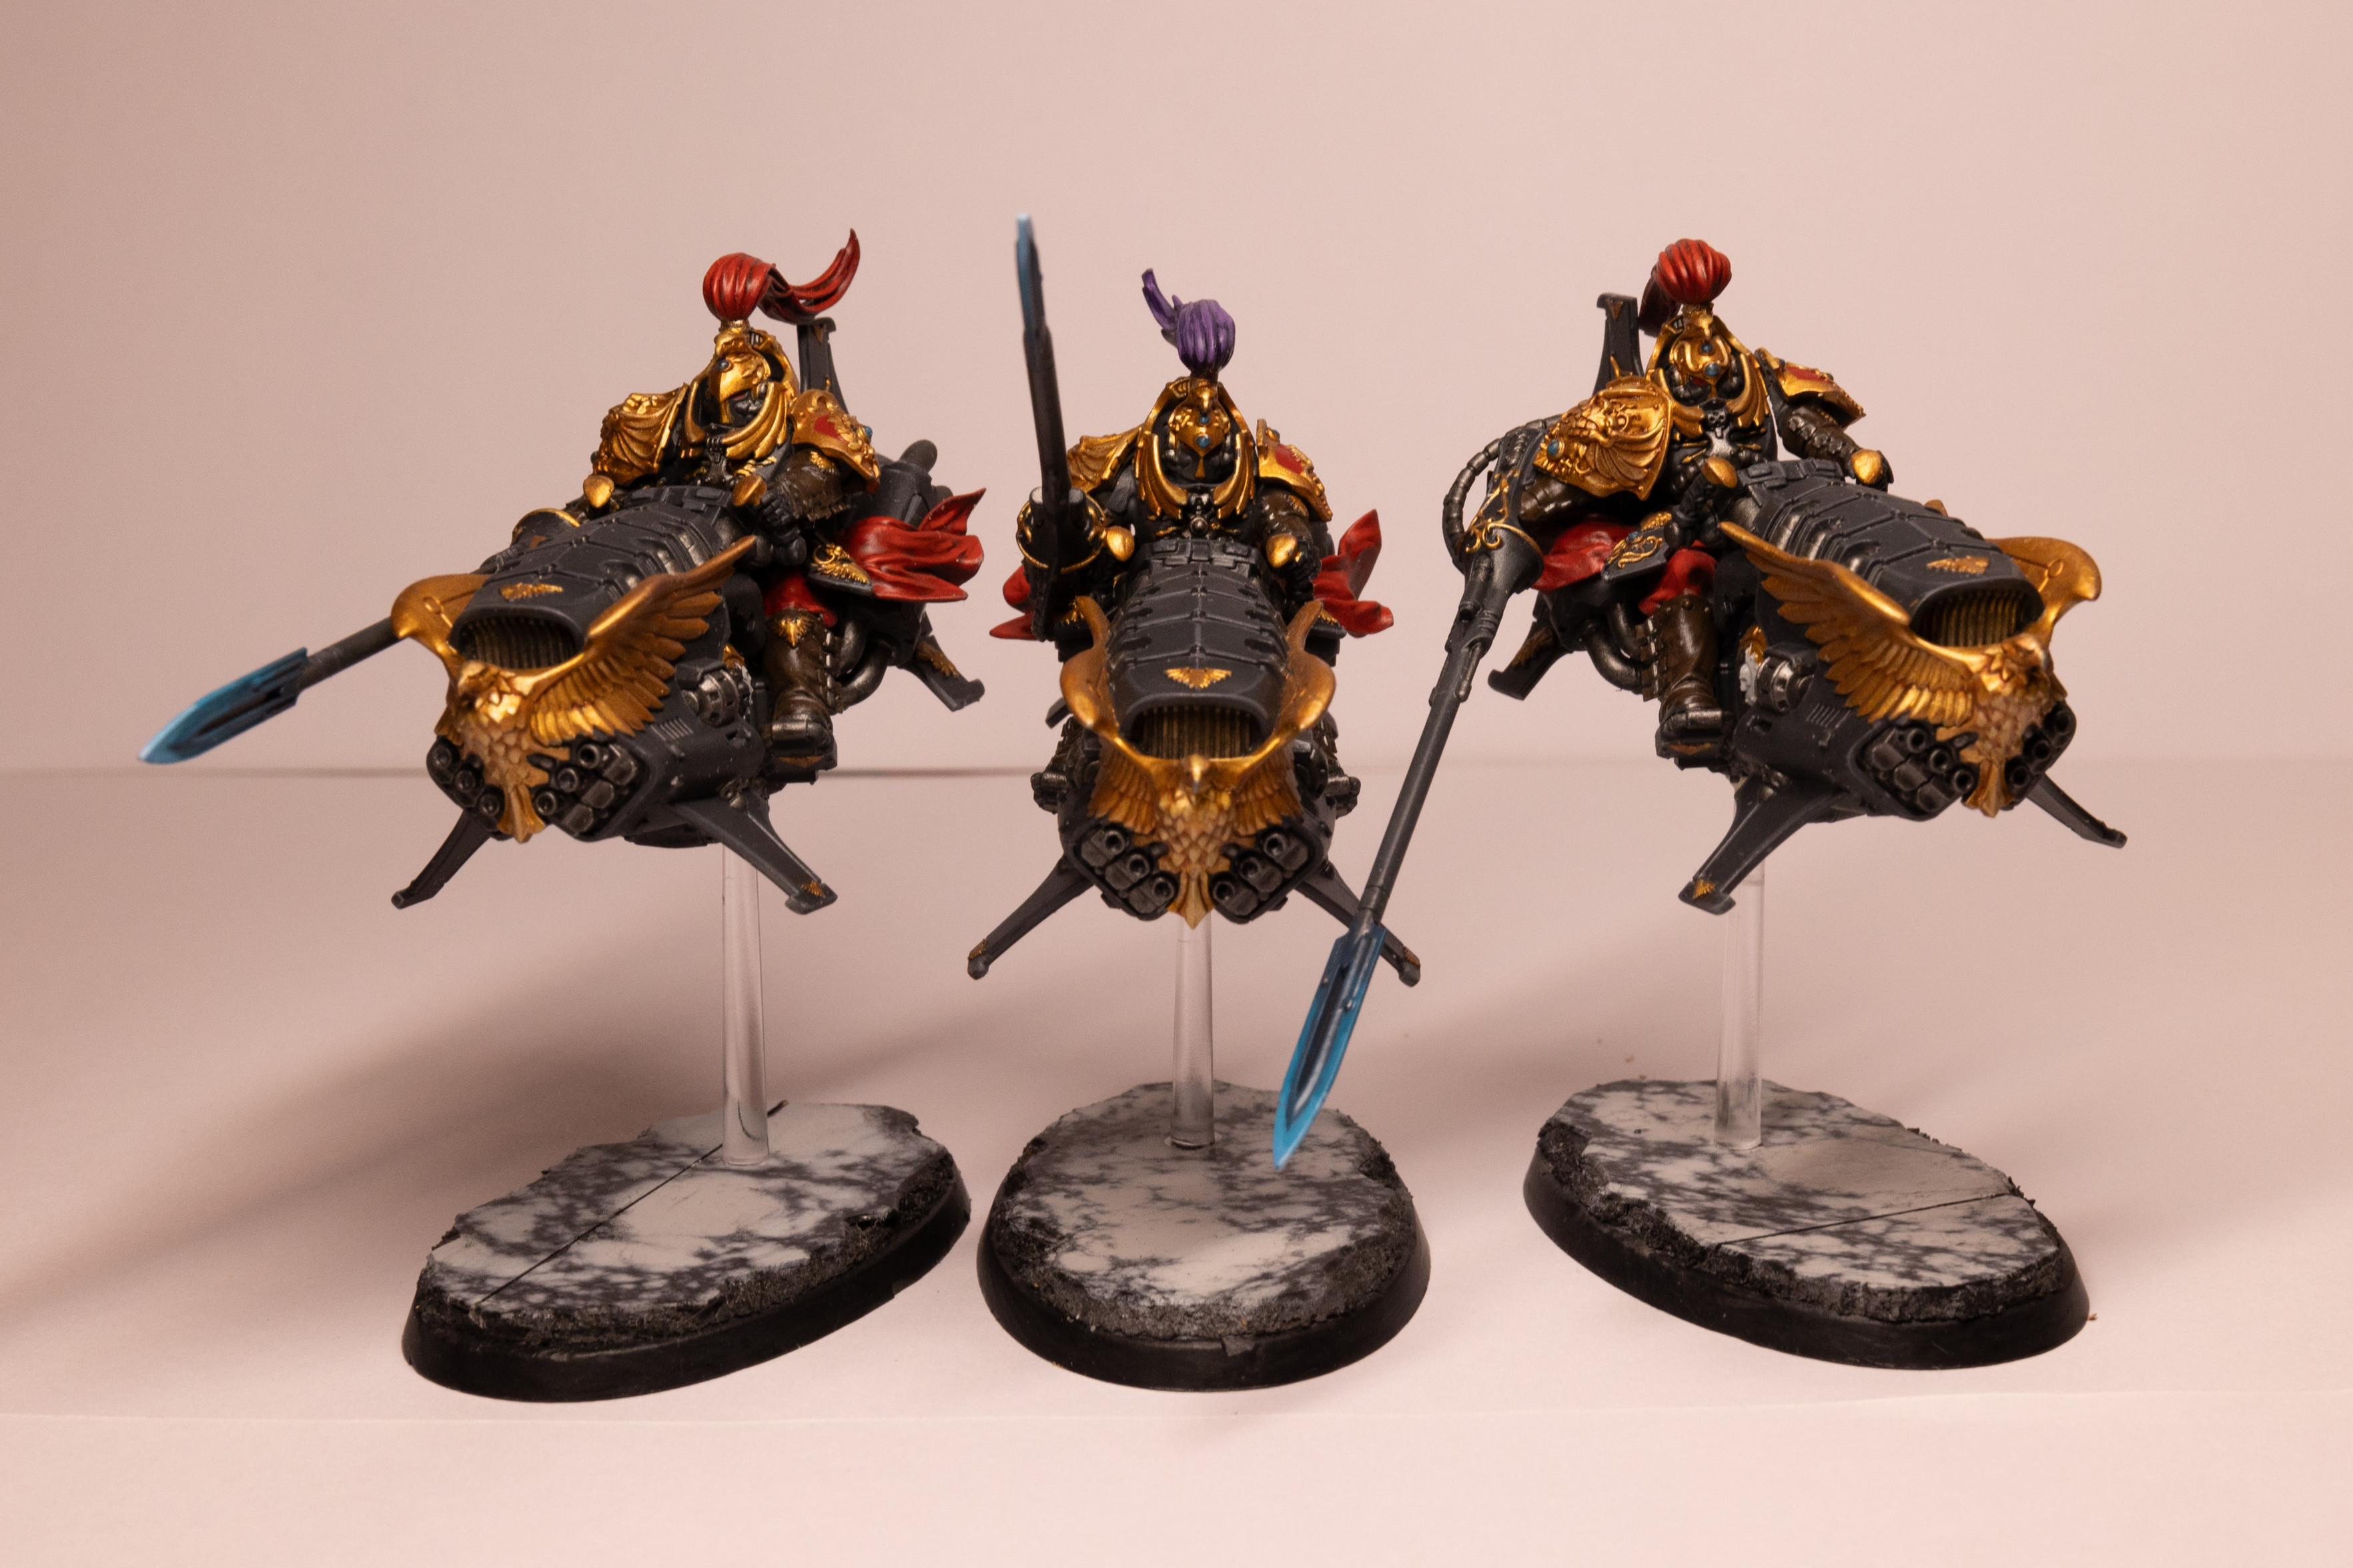 Three Warhammer 40k Custodian Vertus Praetors in the Shadowkeepers color scheme. They are three armoured warriors on large jet bikes painted in black armour with gold gold trim and red accents. The front of each bike features a large golden eagle and each warrior is holding a long lance with a glowing electric blue tip. The central warrior has a purple head plume. They are all mounted on clear plastic sticks on top of a black and while marble-like base